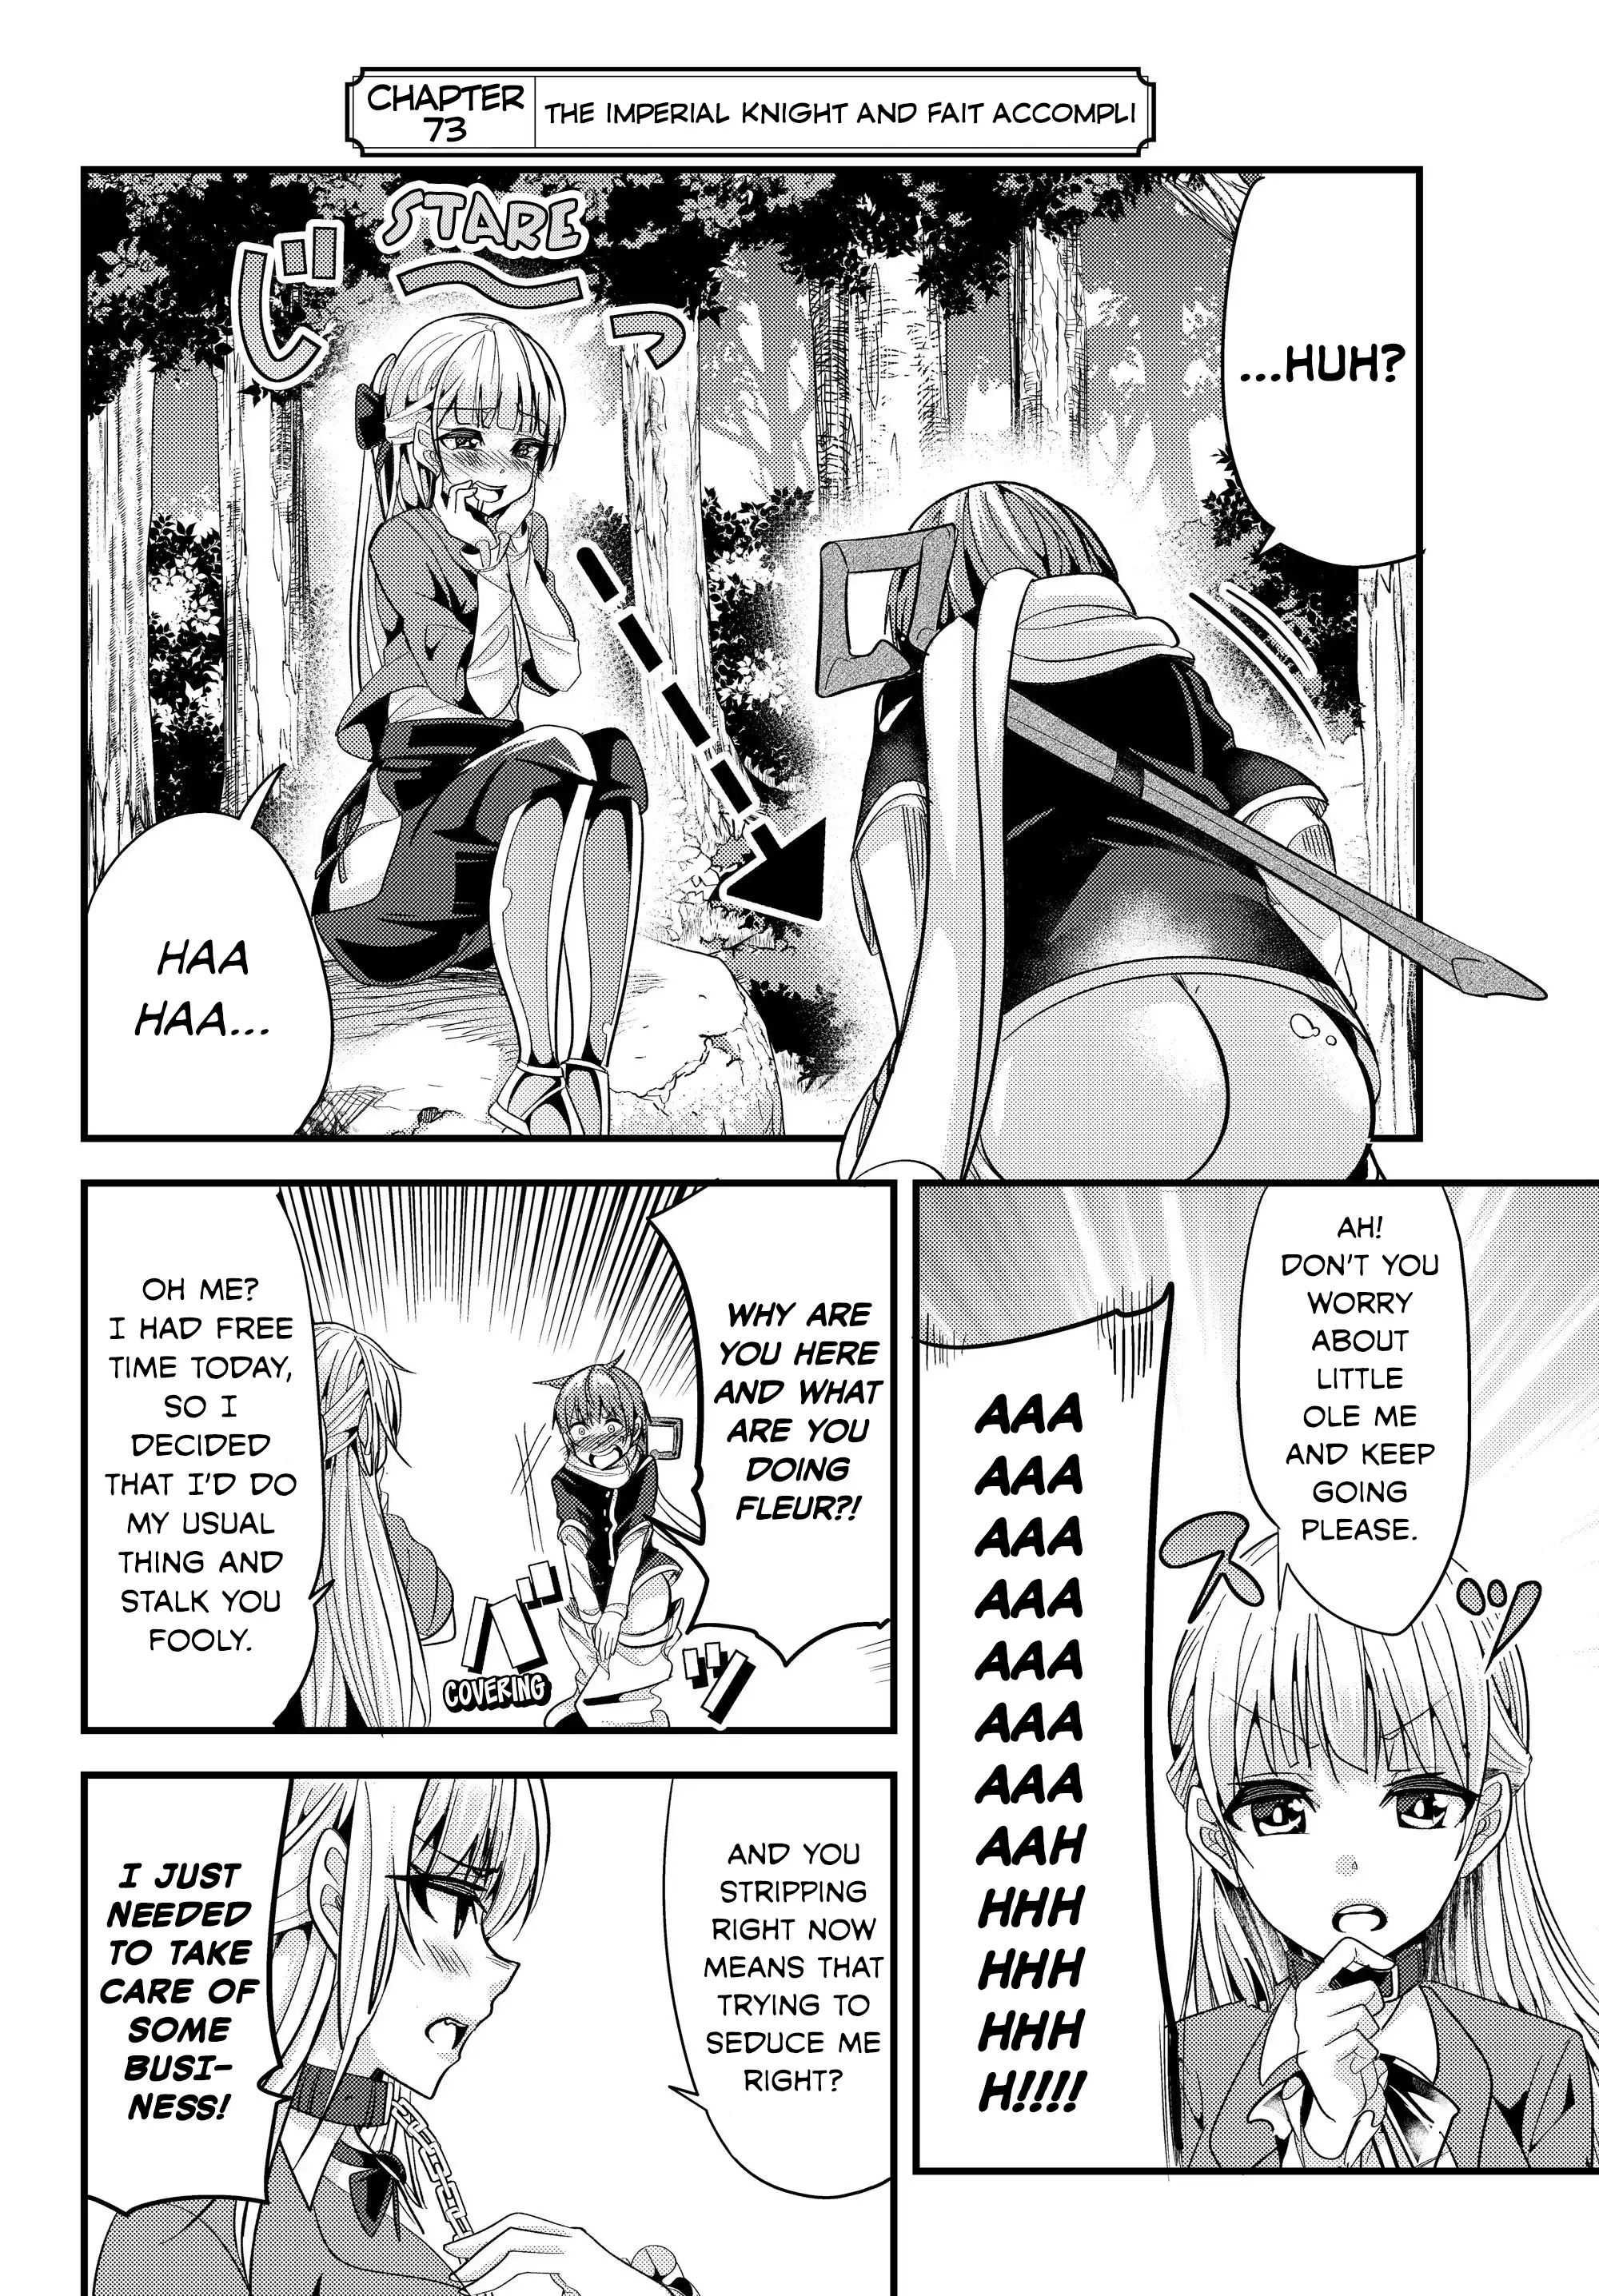 A Story About Treating a Female Knight, Who Has Never Been Treated as a Woman, as a Woman - Chapter 73 Page 2